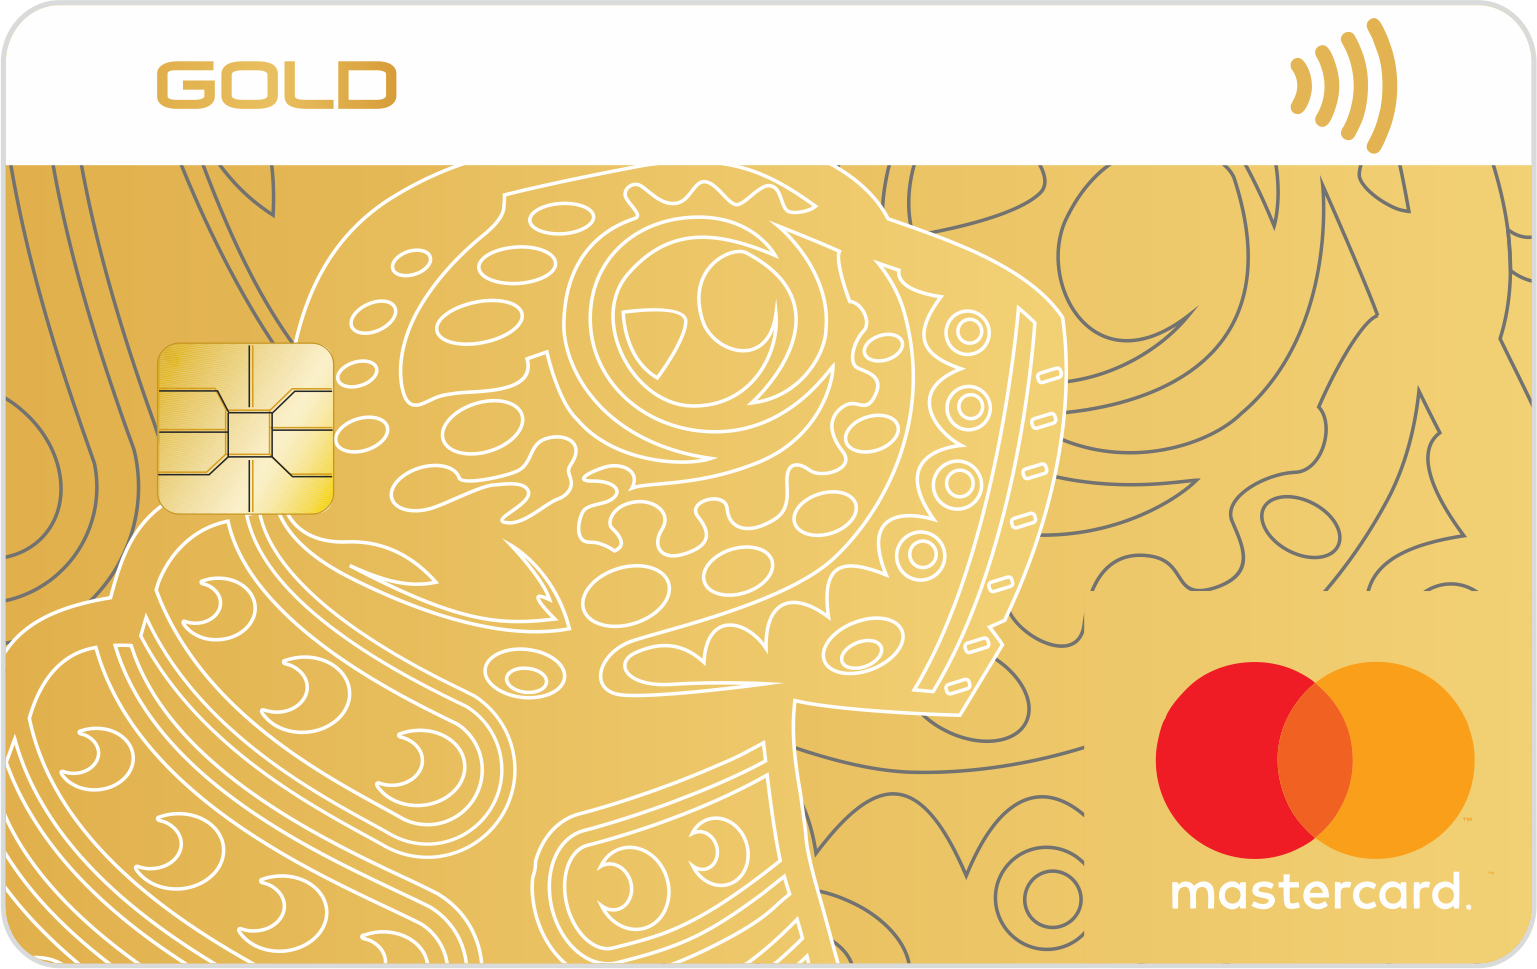 Business Mastercard Gold